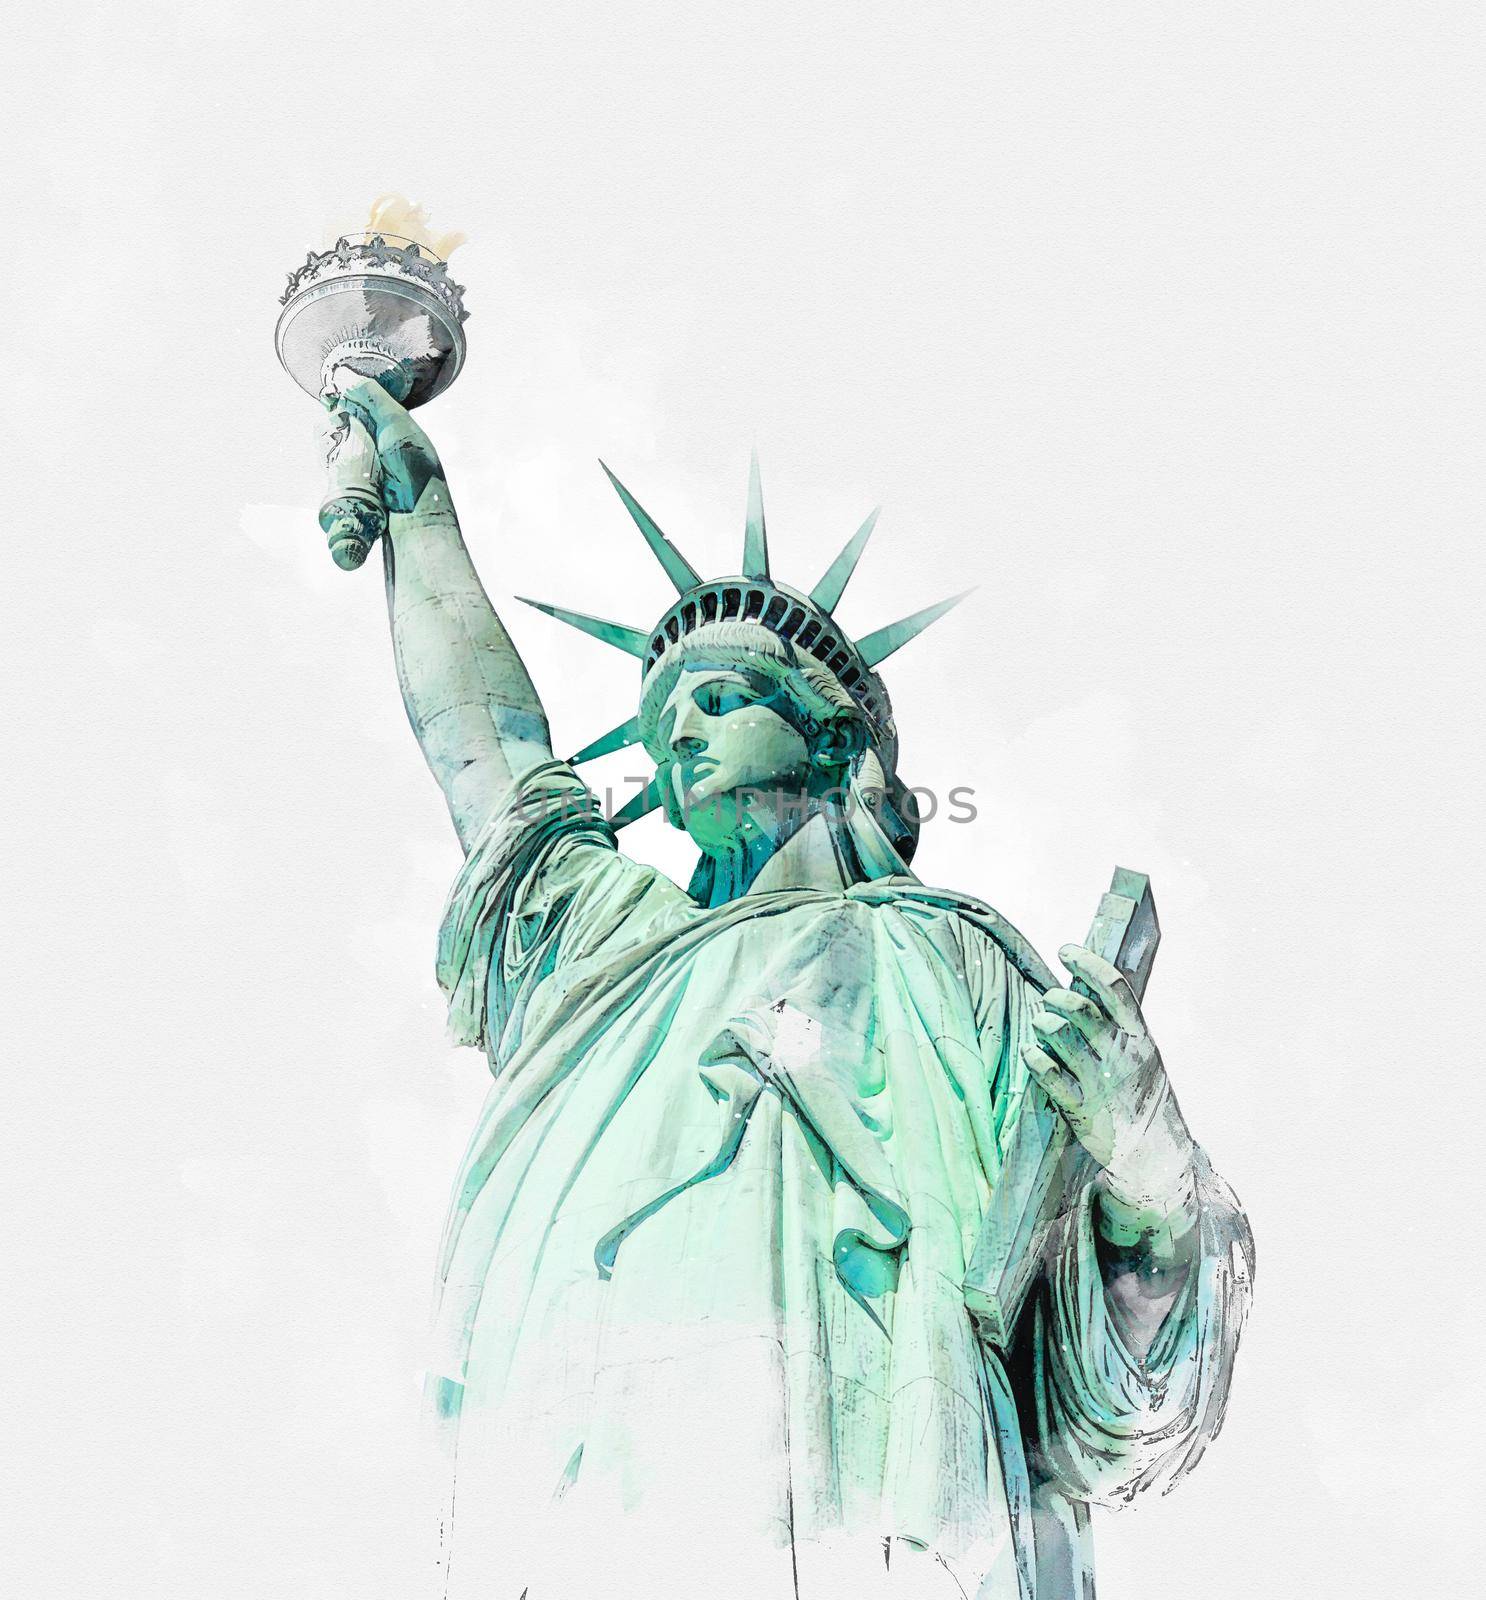 Watercolor painting illustration of Statue of Liberty by Mariakray